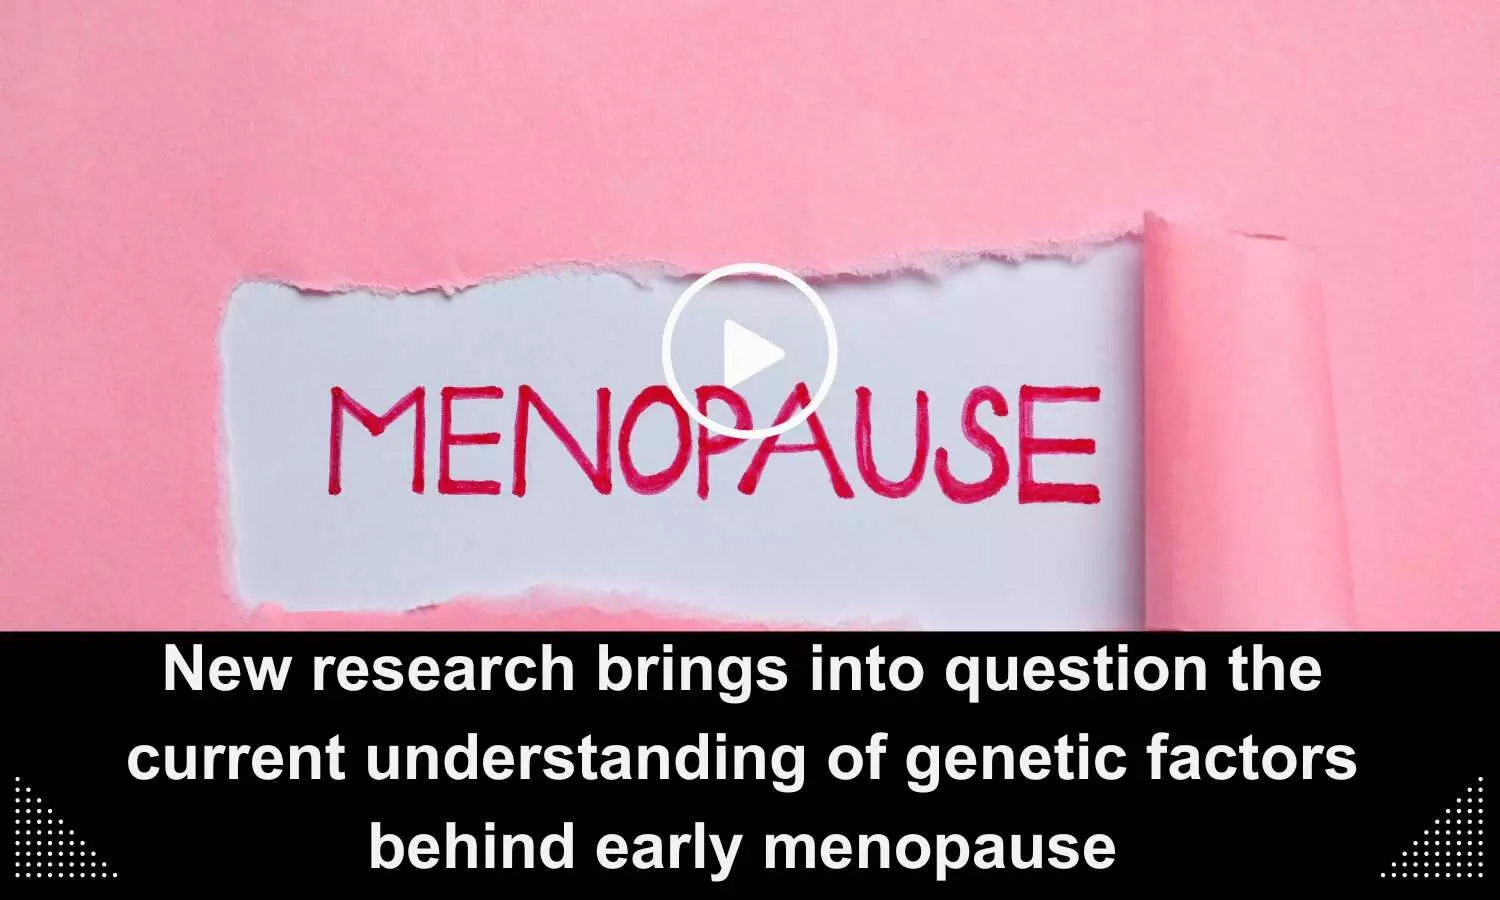 New research brings into question the current understanding of genetic factors behind early menopause